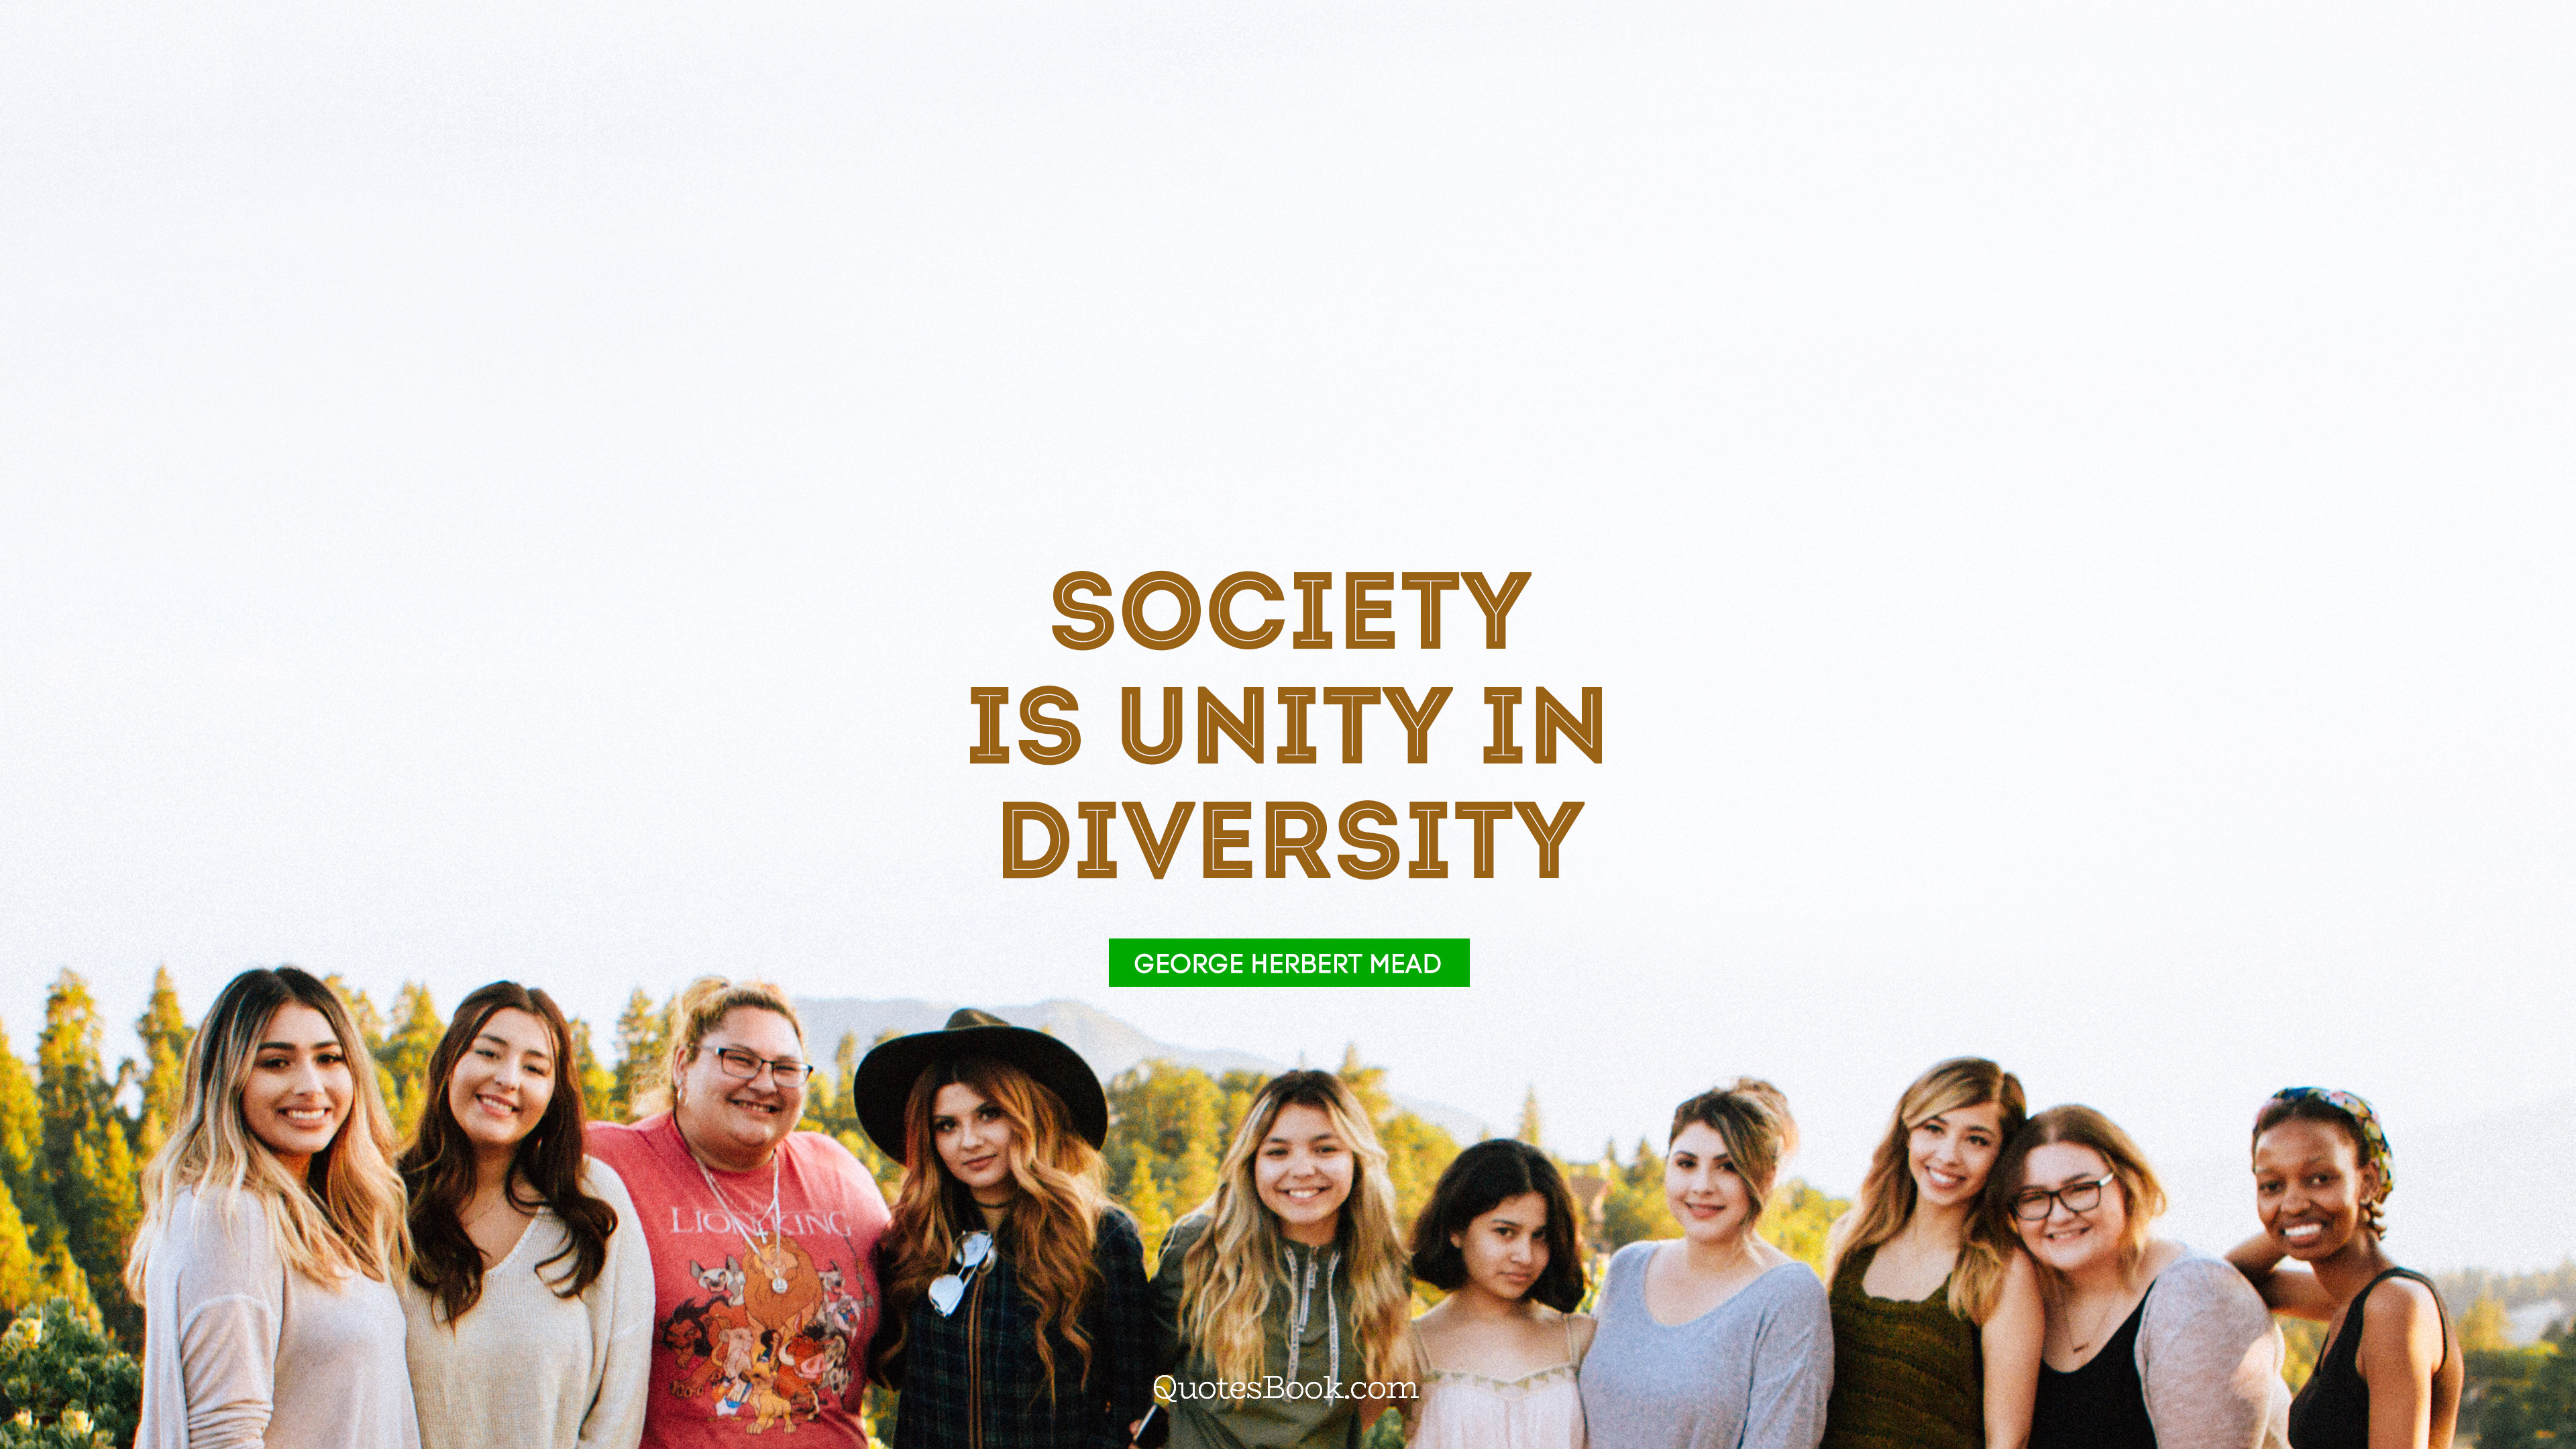 Society is unity in diversity. - Quote by George Herbert Mead - QuotesBook